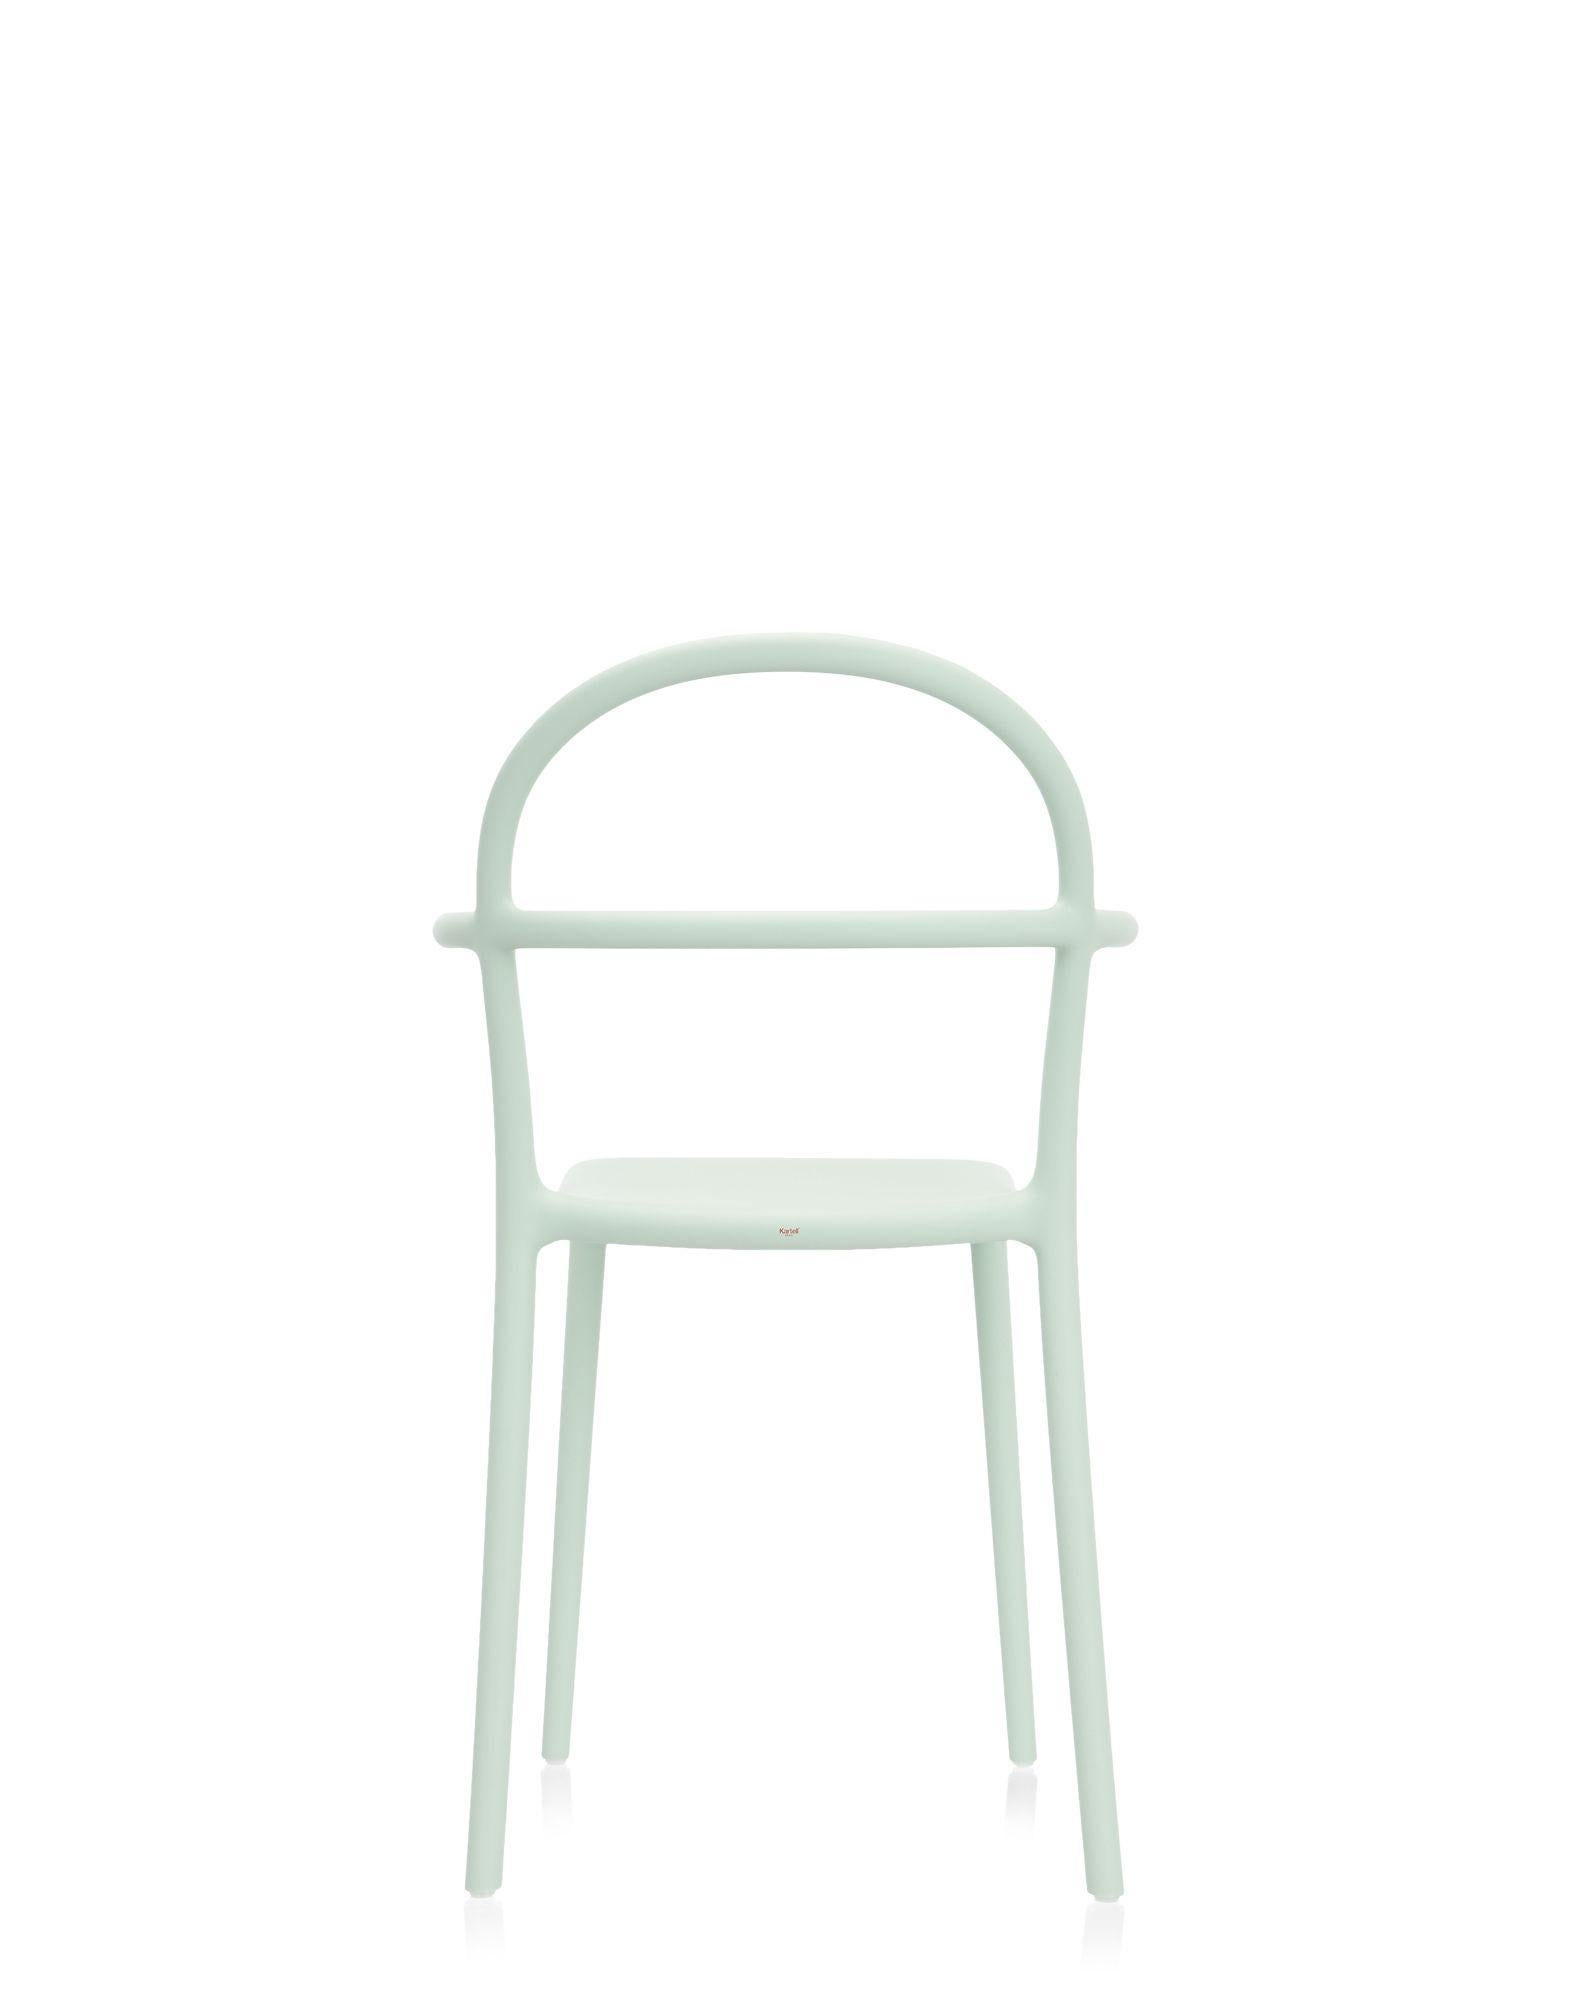 Italian Set of 2 Kartell Generic C Chairs in Sage Green by Philippe Starck For Sale